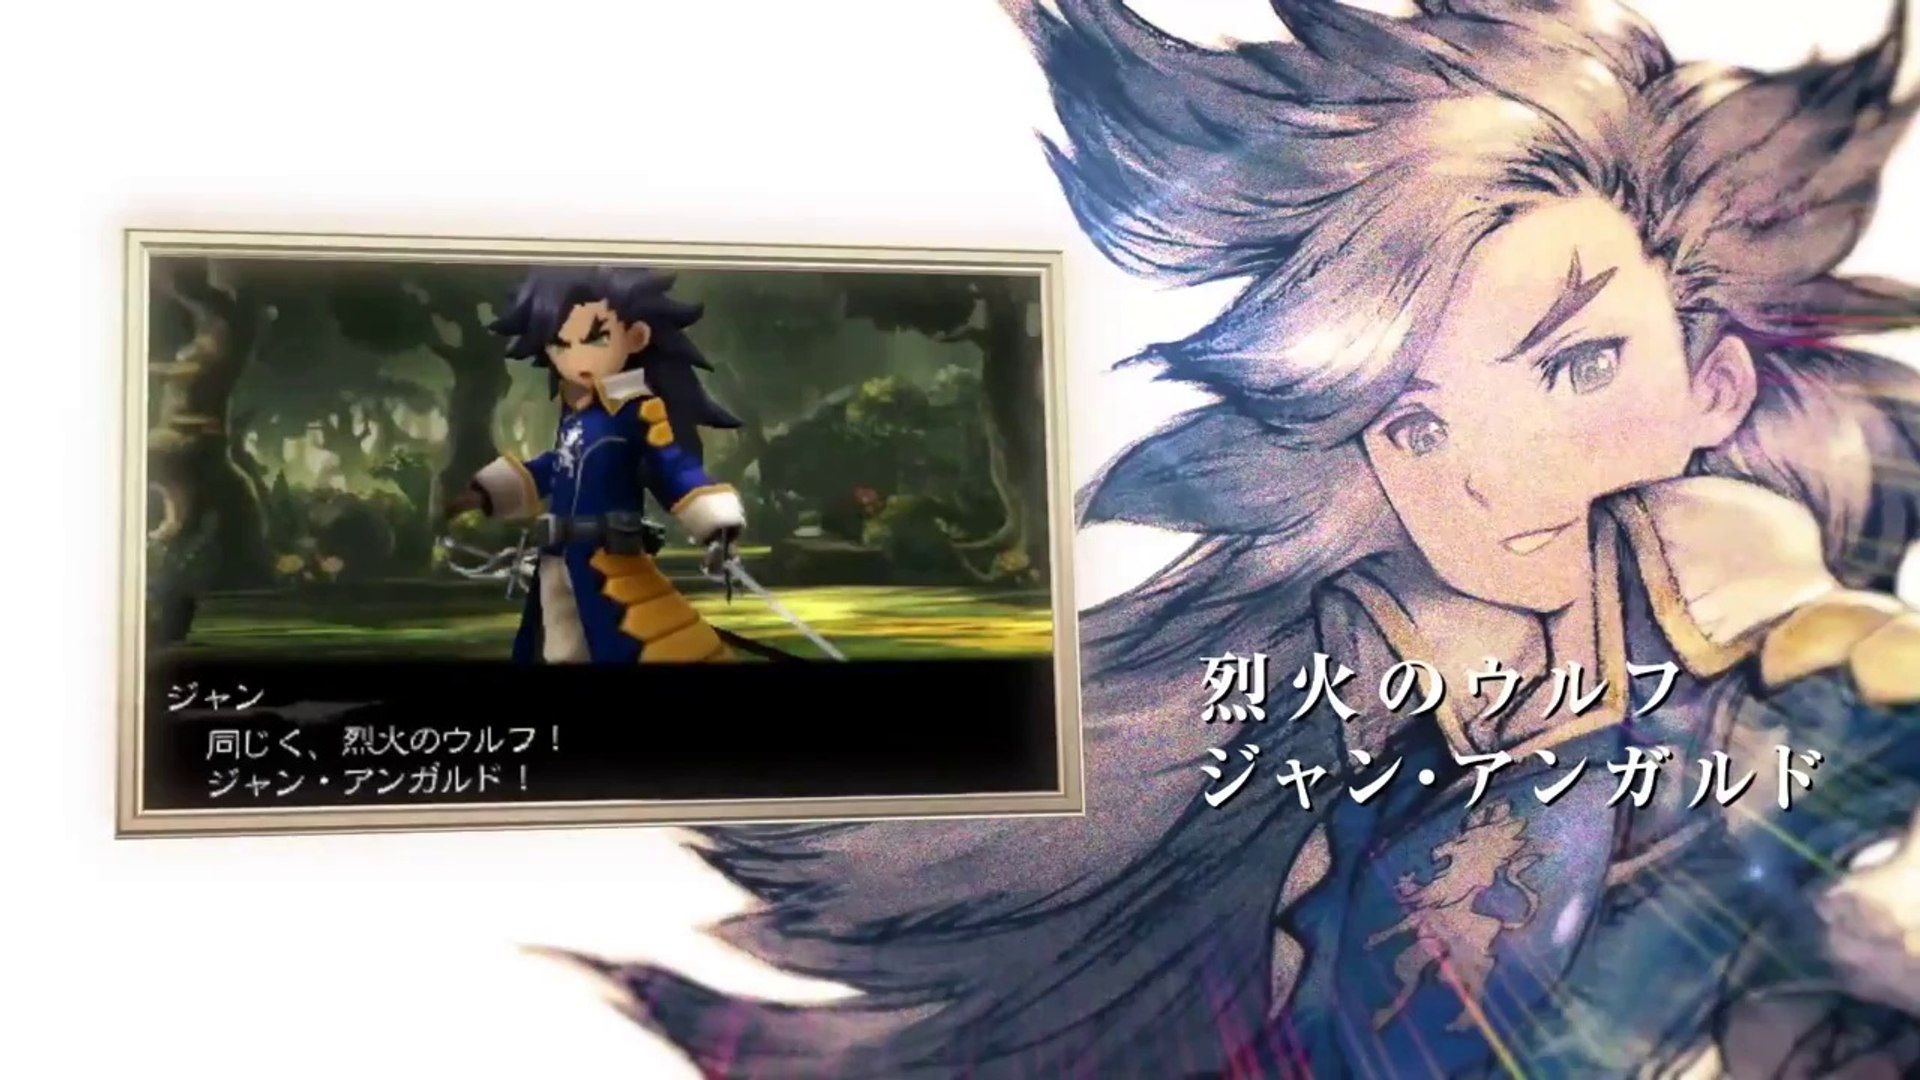 Bravely Second Three Musketeers Gameplay Story Trailer Hd Video Dailymotion